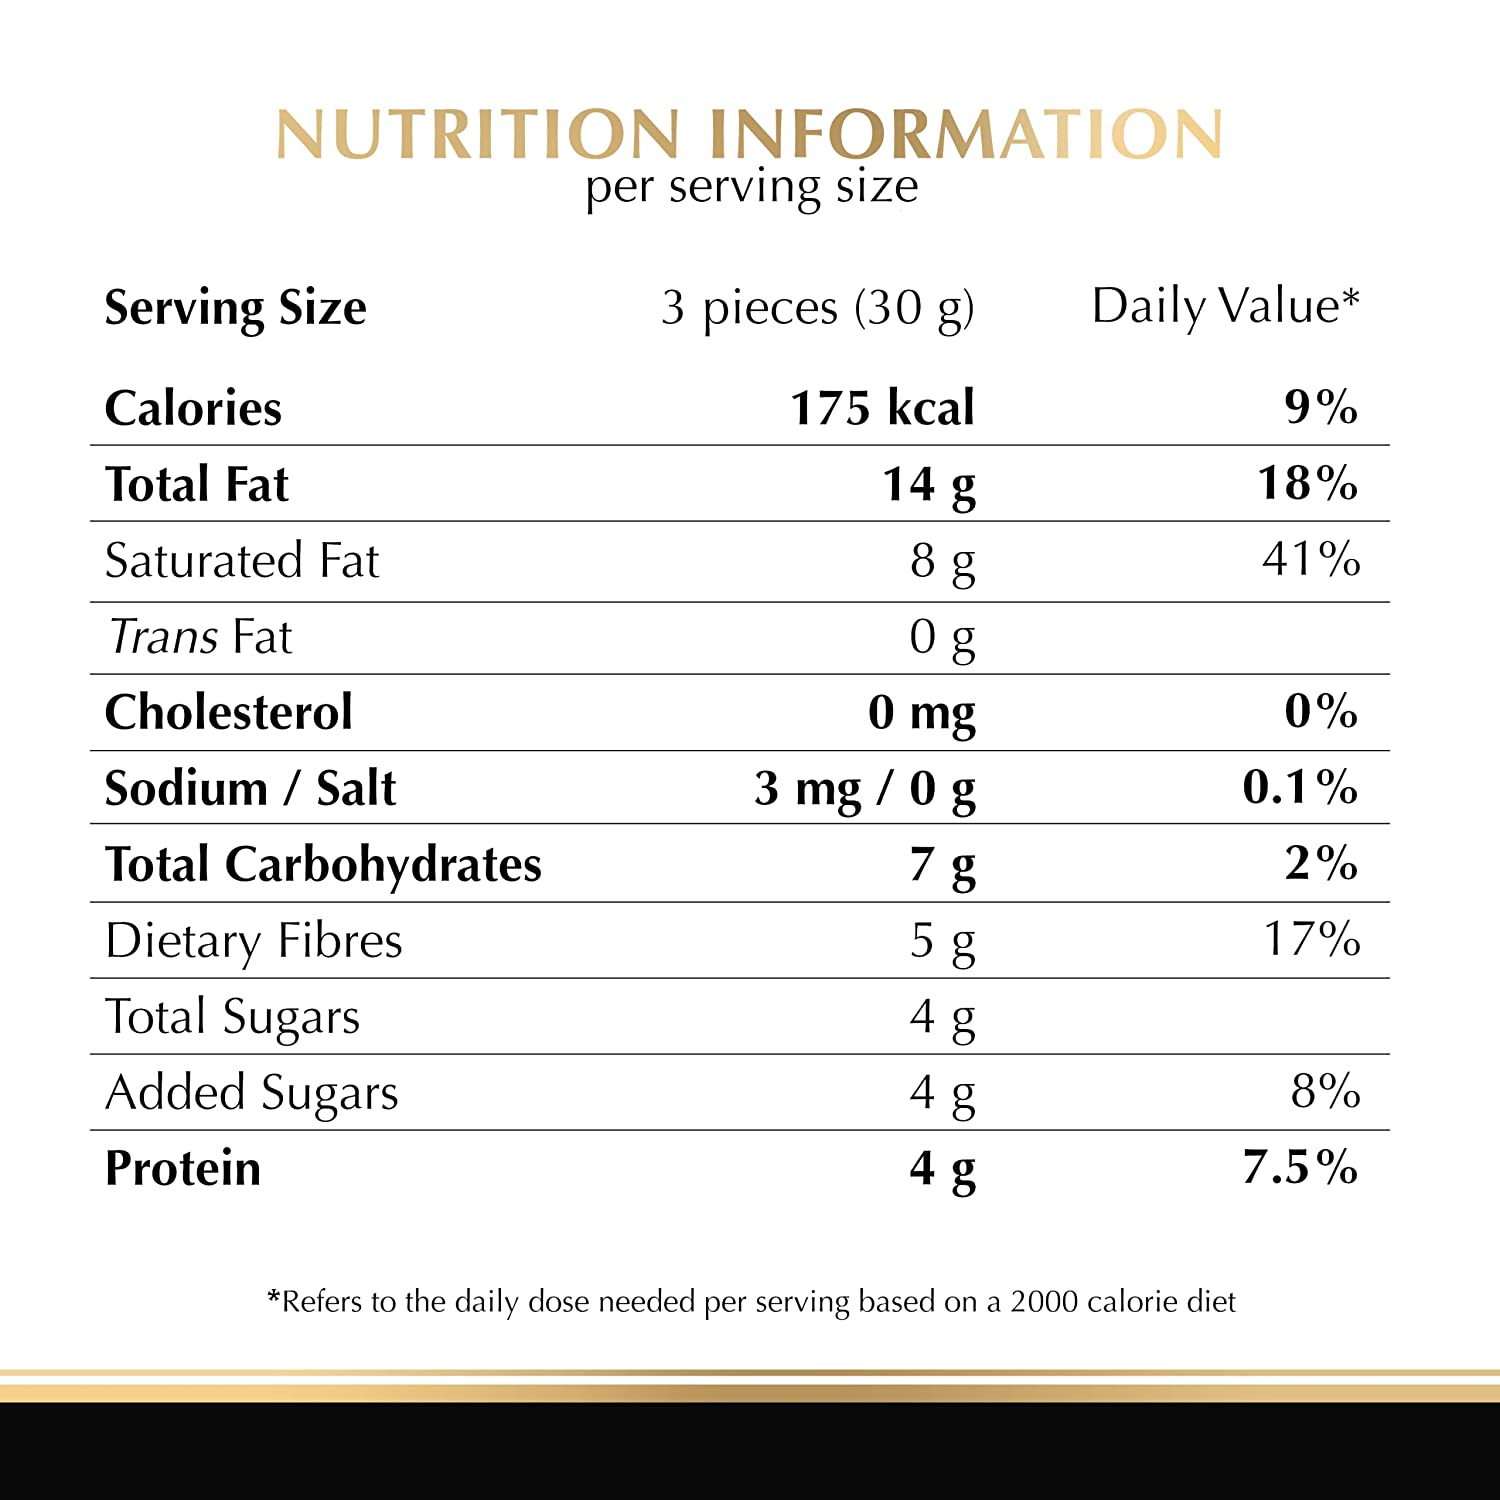 A nutrition label showing the nutritional information of Lindt Excellence 85% Cocoa Bar 100g by Lindt.